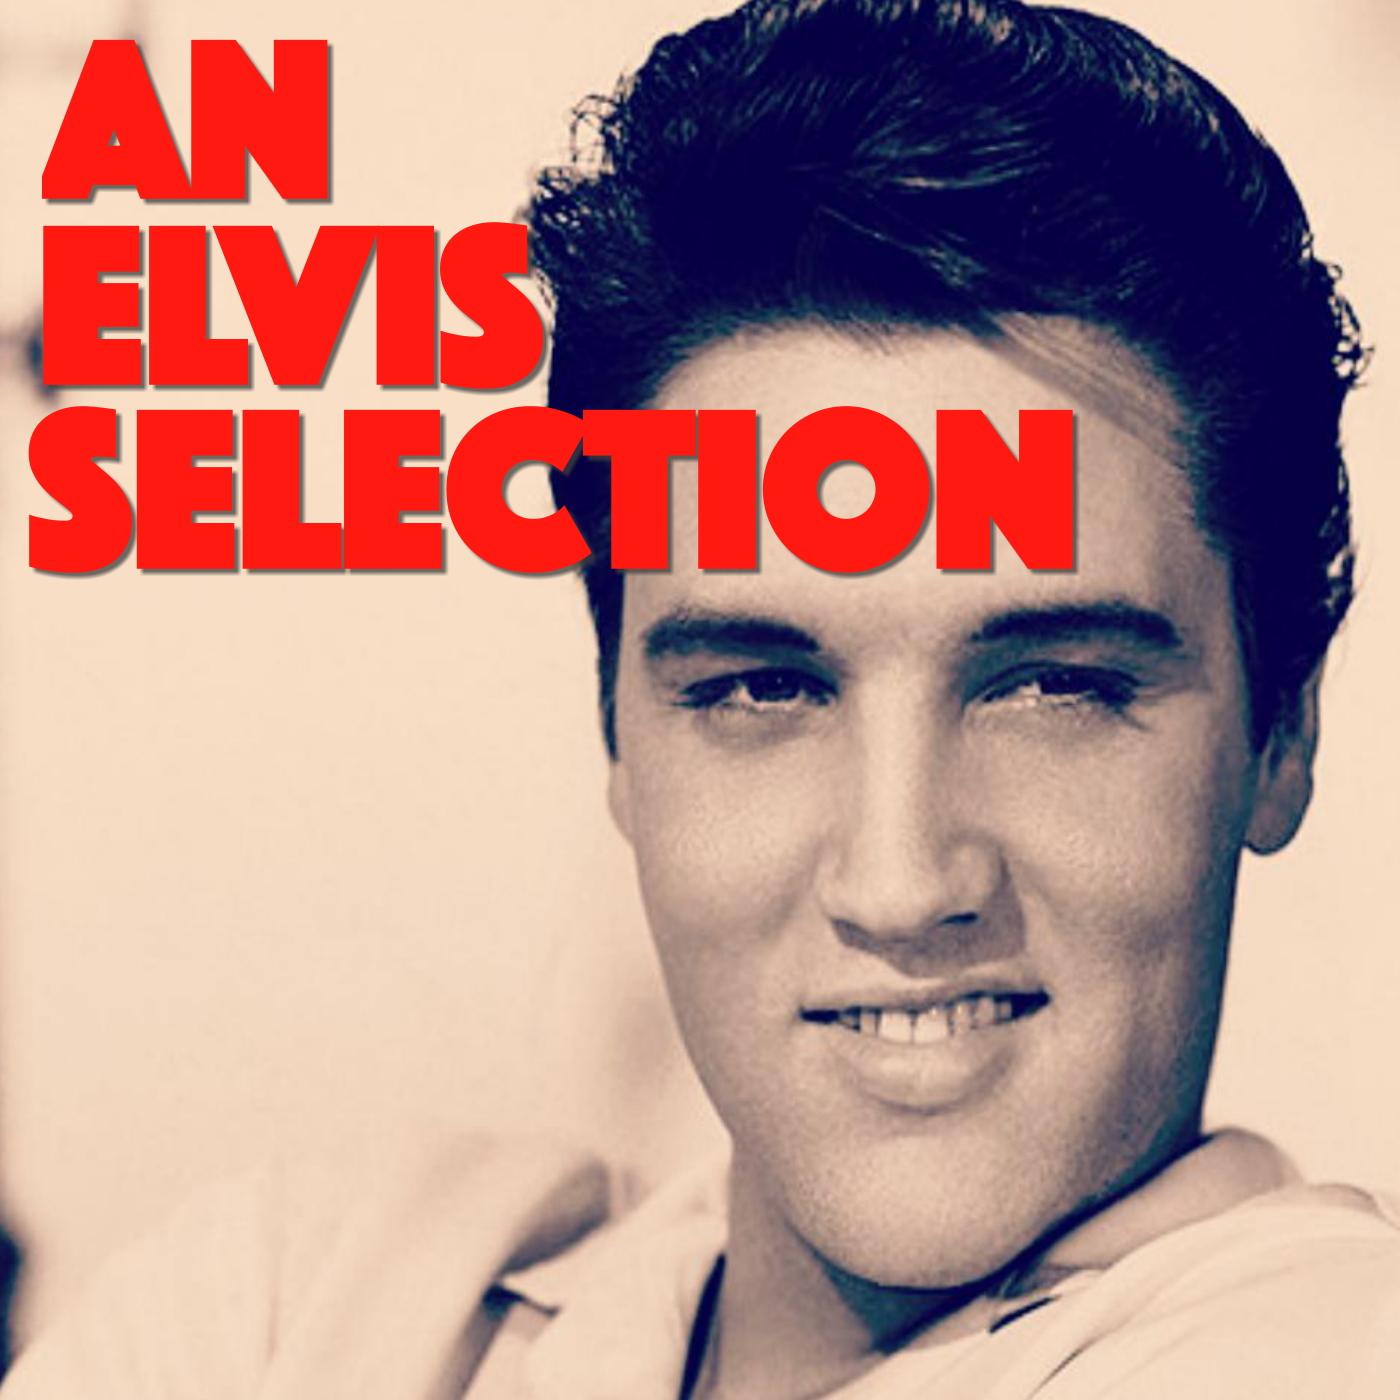 An Elvis Selection